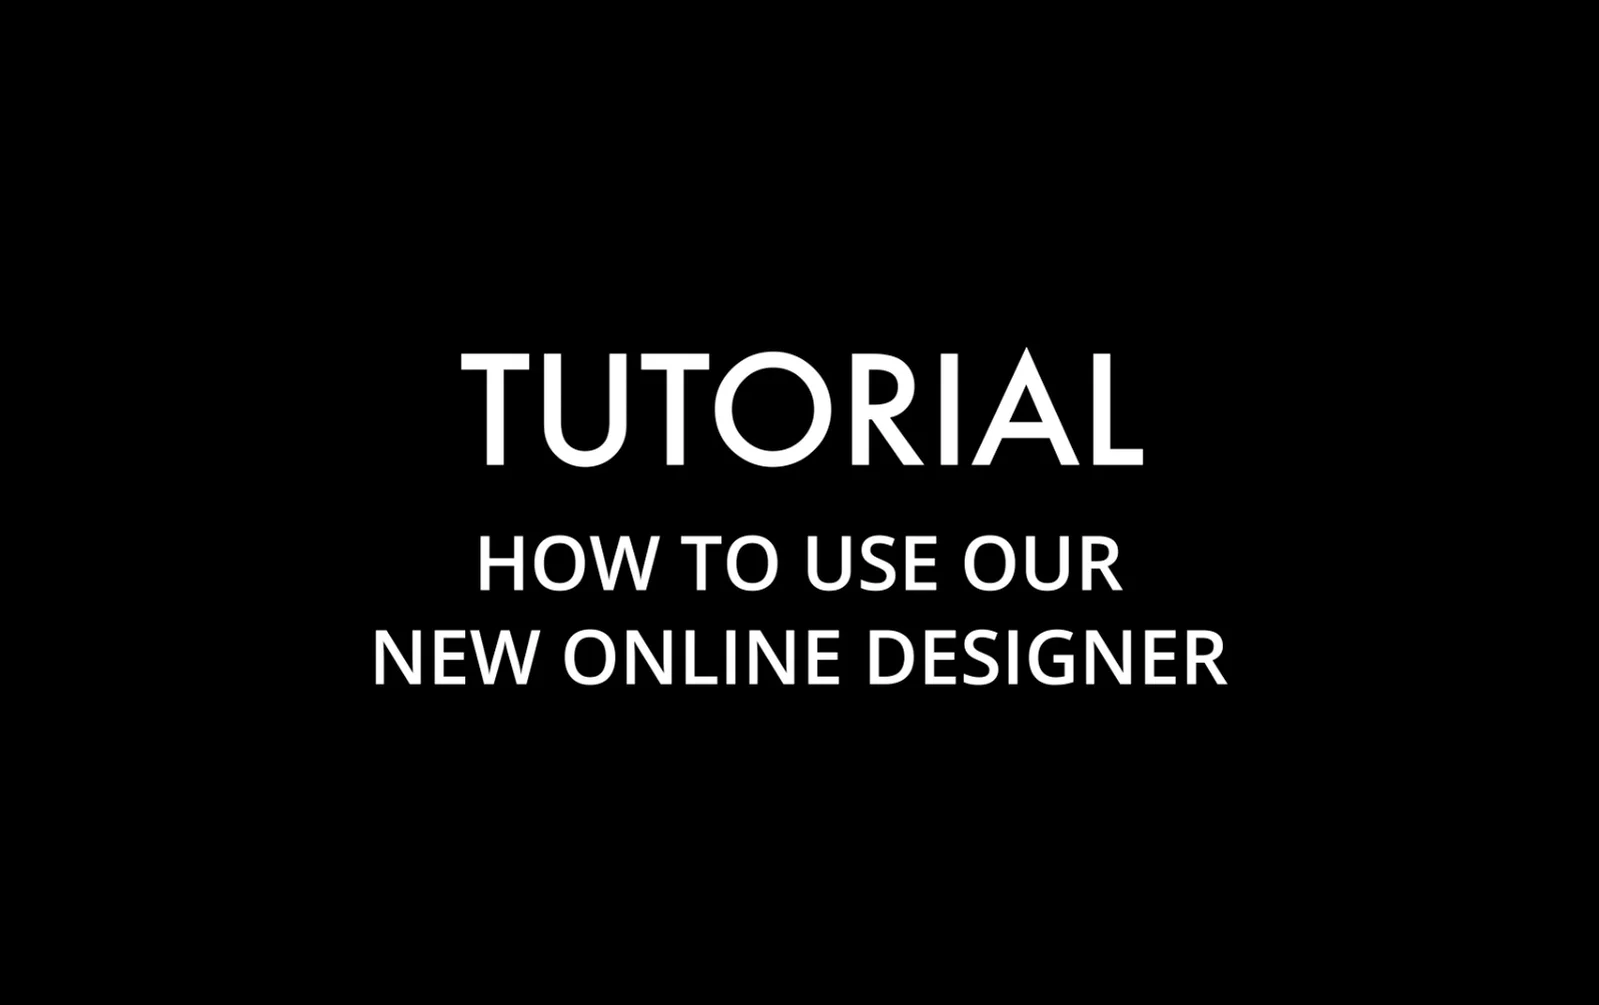 How to Use our New Online Designer on Vimeo